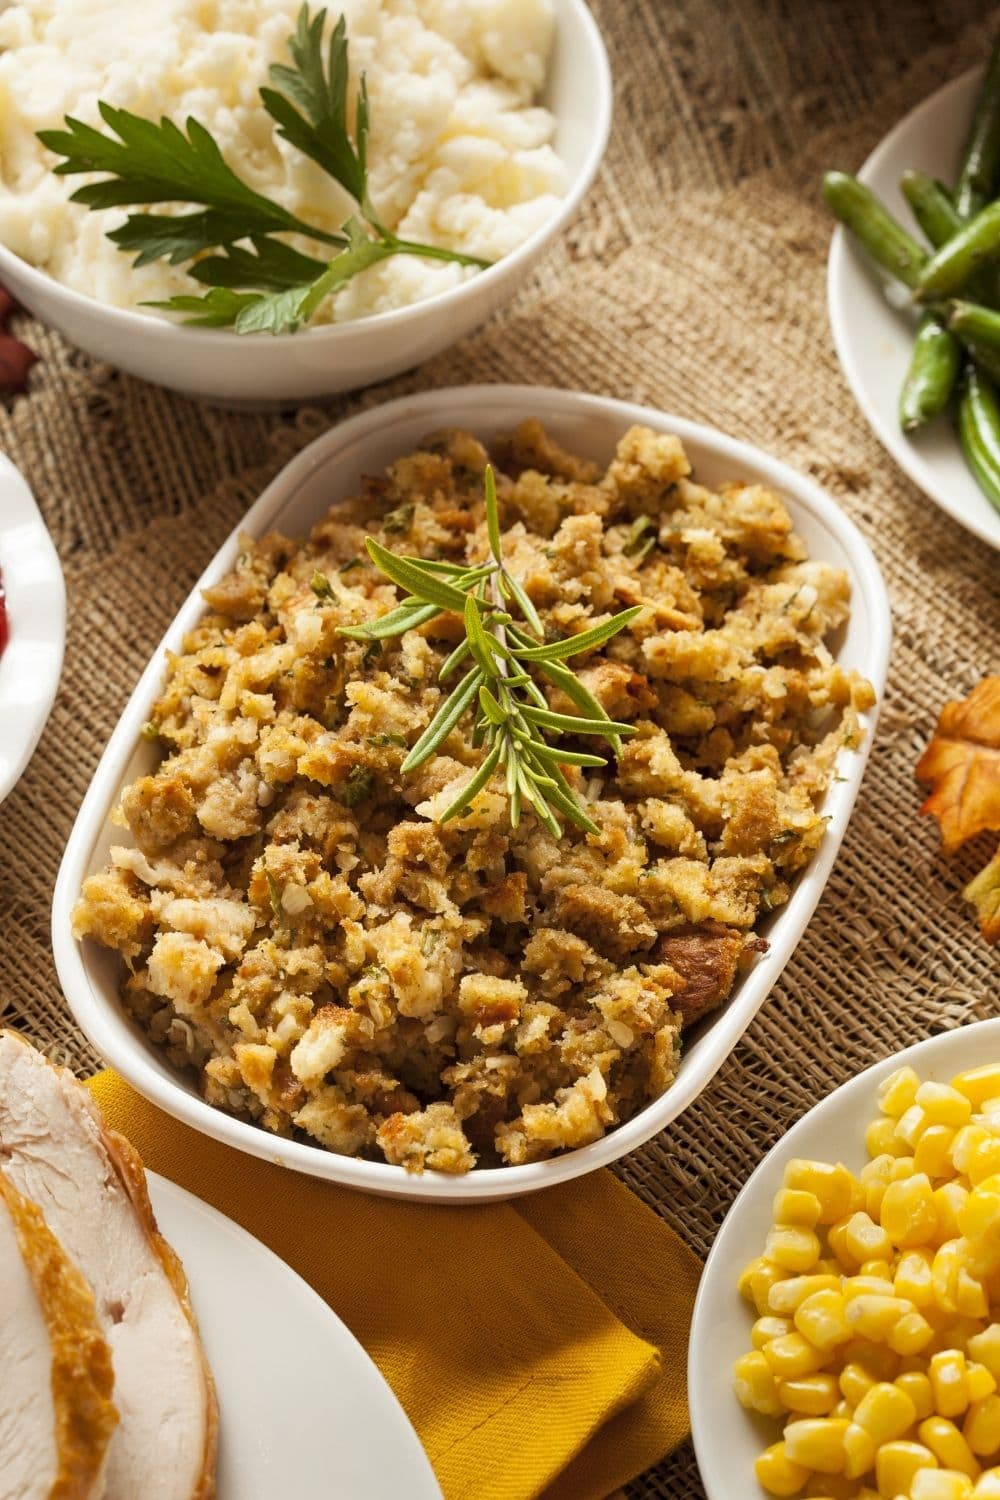 Thanksgiving Stuffing Made with Herbs and Bread